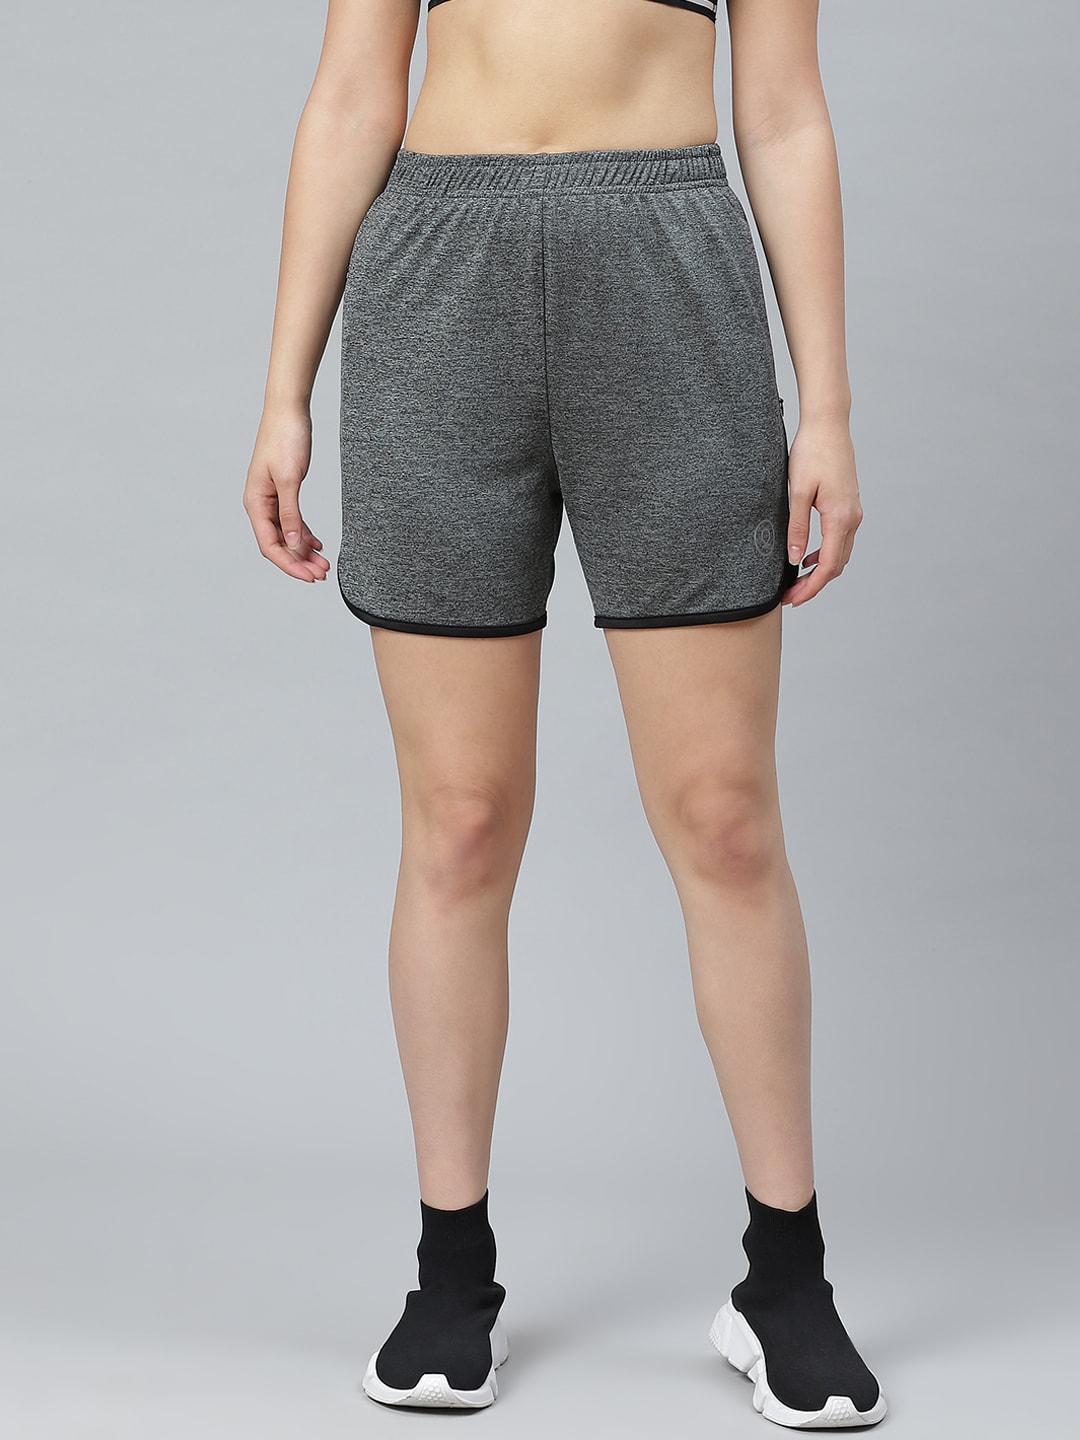 Chkokko Women Charcoal Grey Solid Running Shorts Price in India